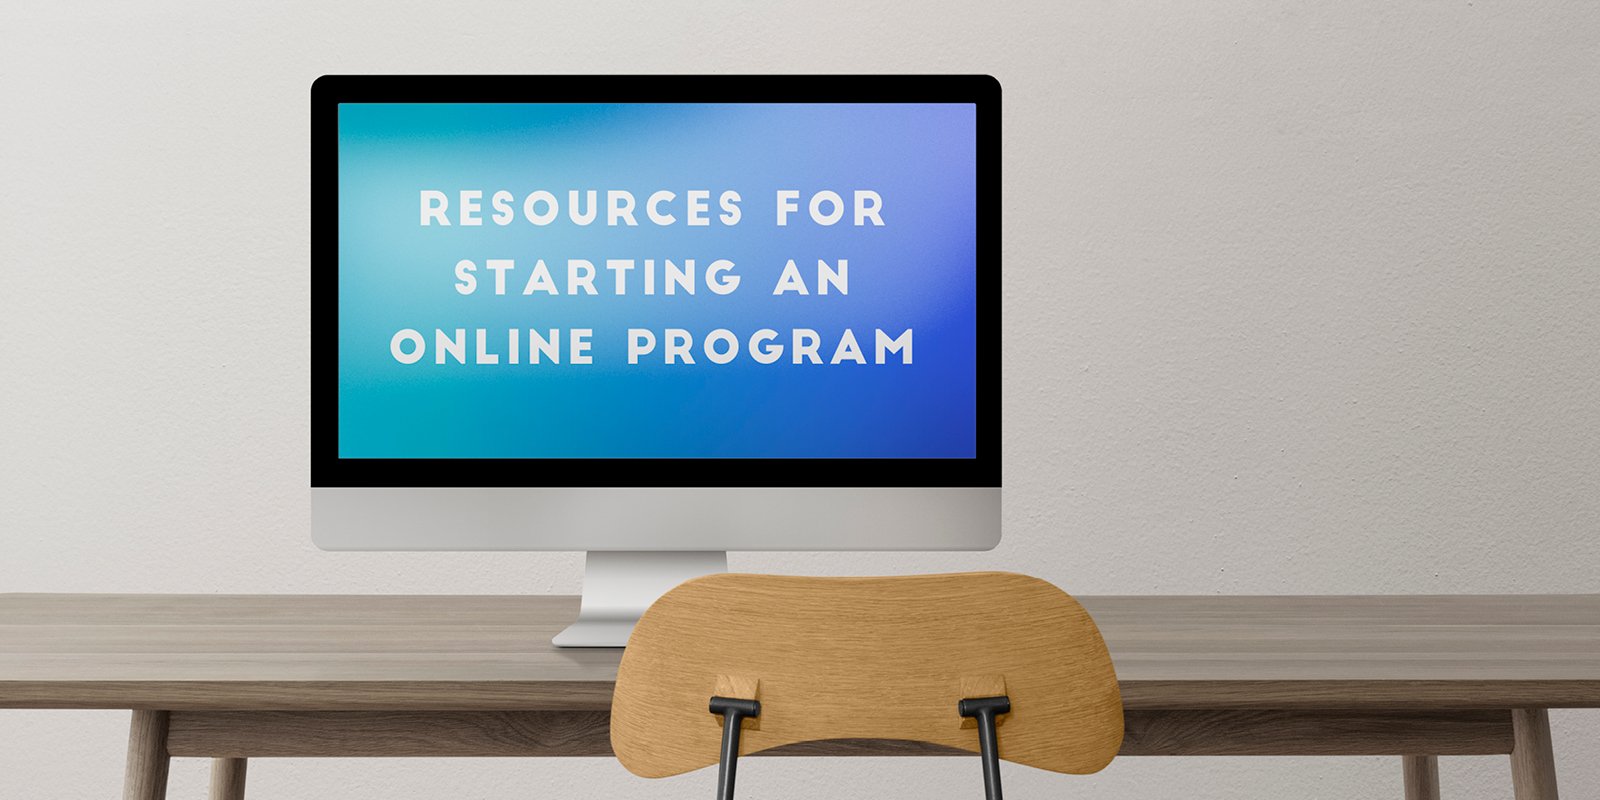 Resources for Starting an Online Program